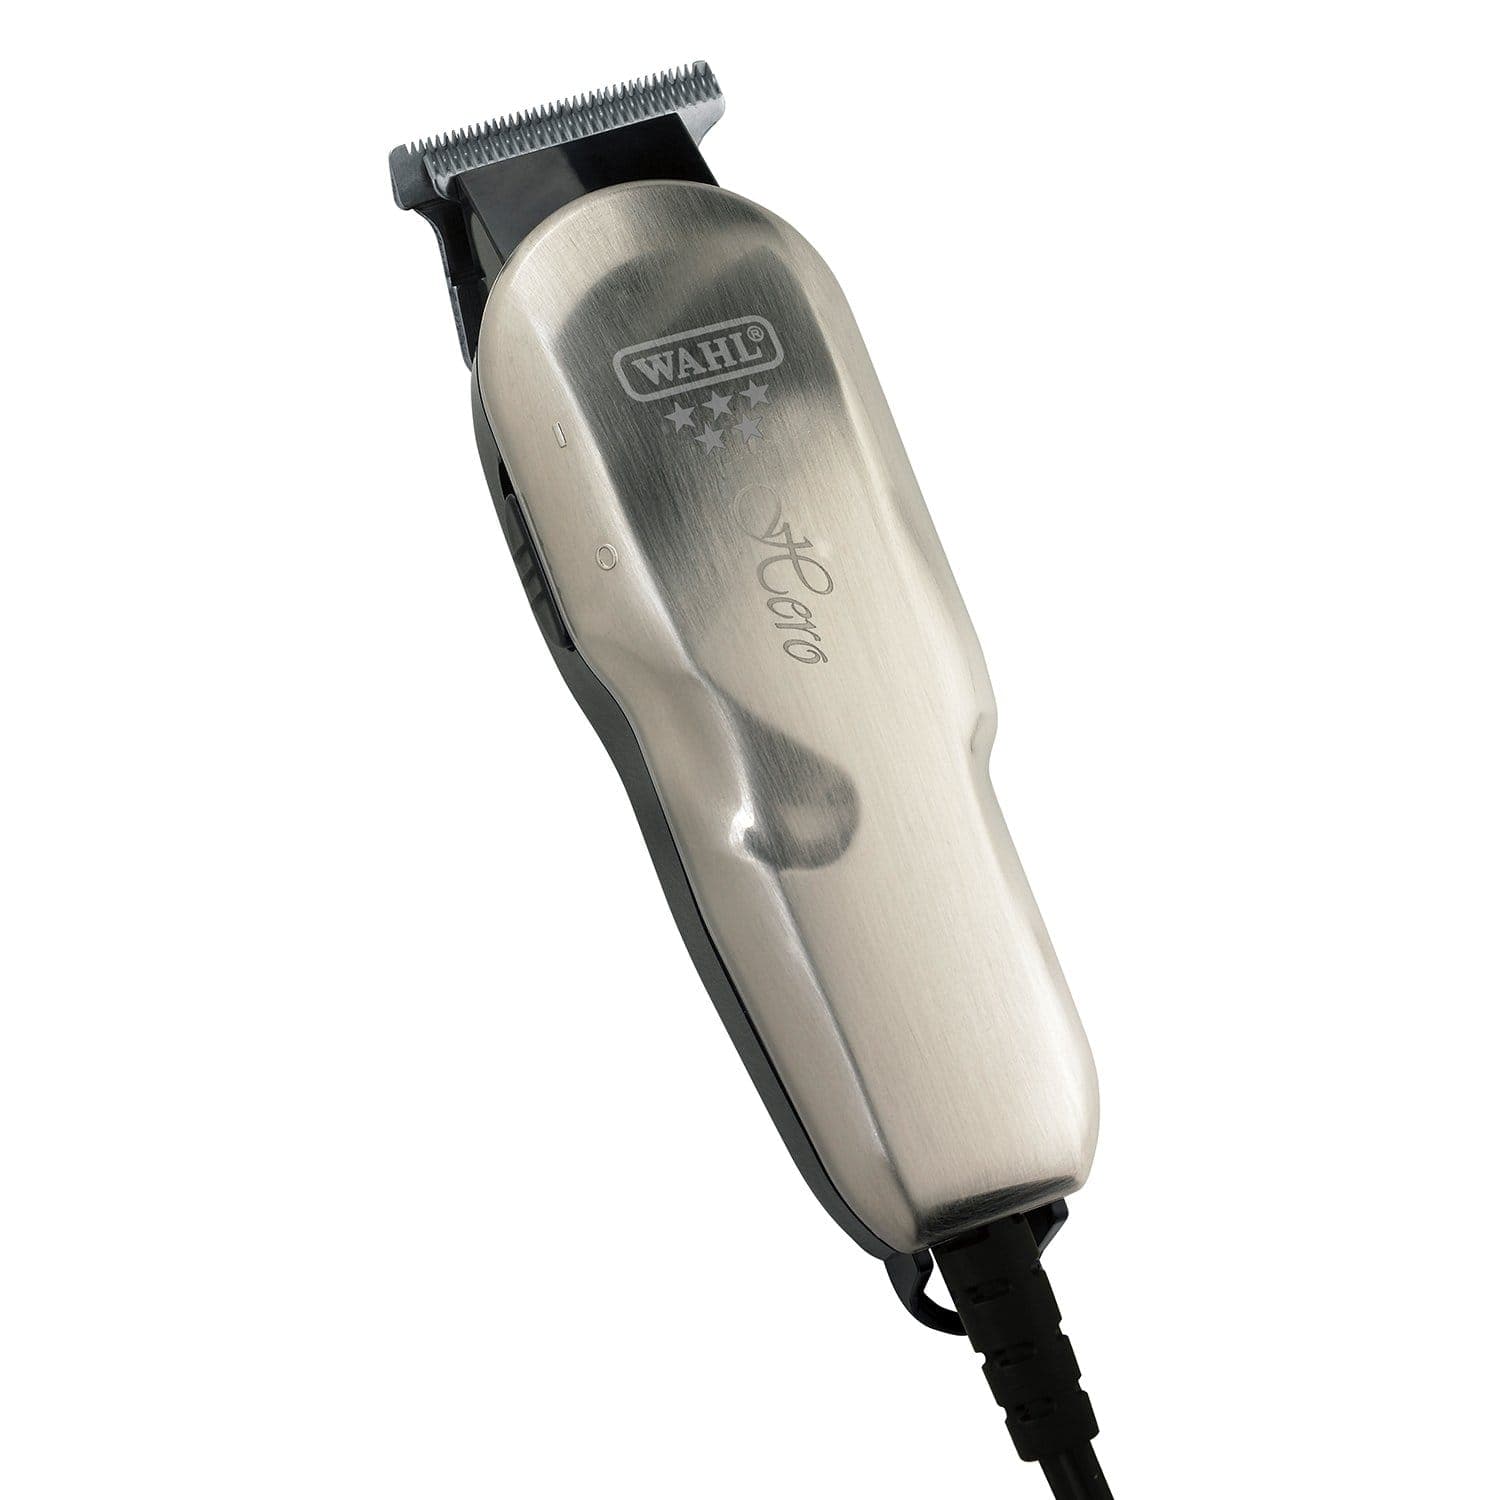 Wahl Hero Professional Corded Trimmer - 8991-727